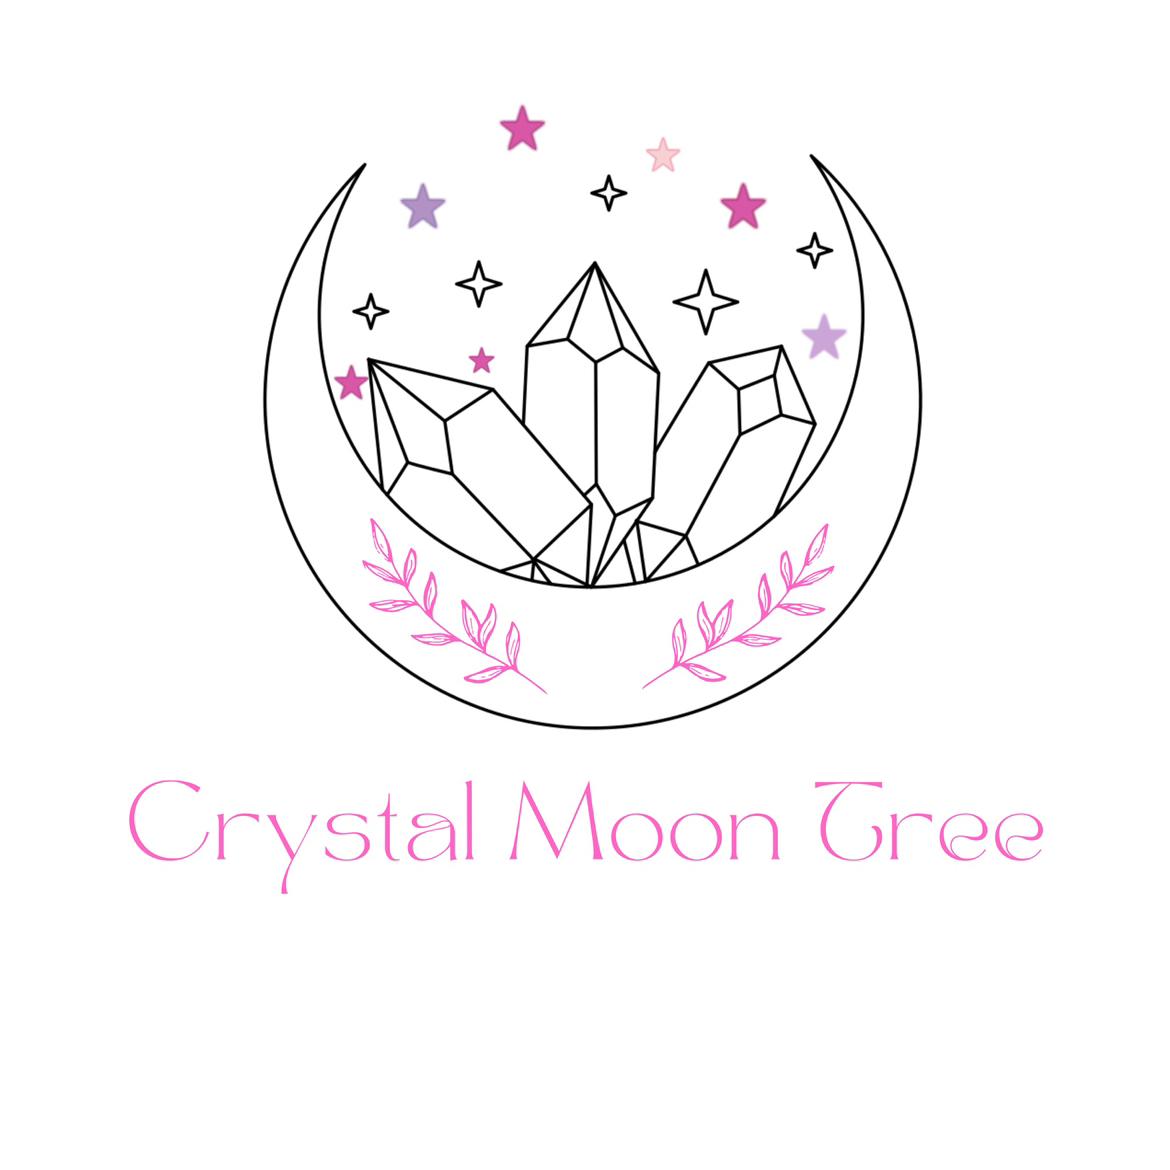 CrystalMoonTree's images